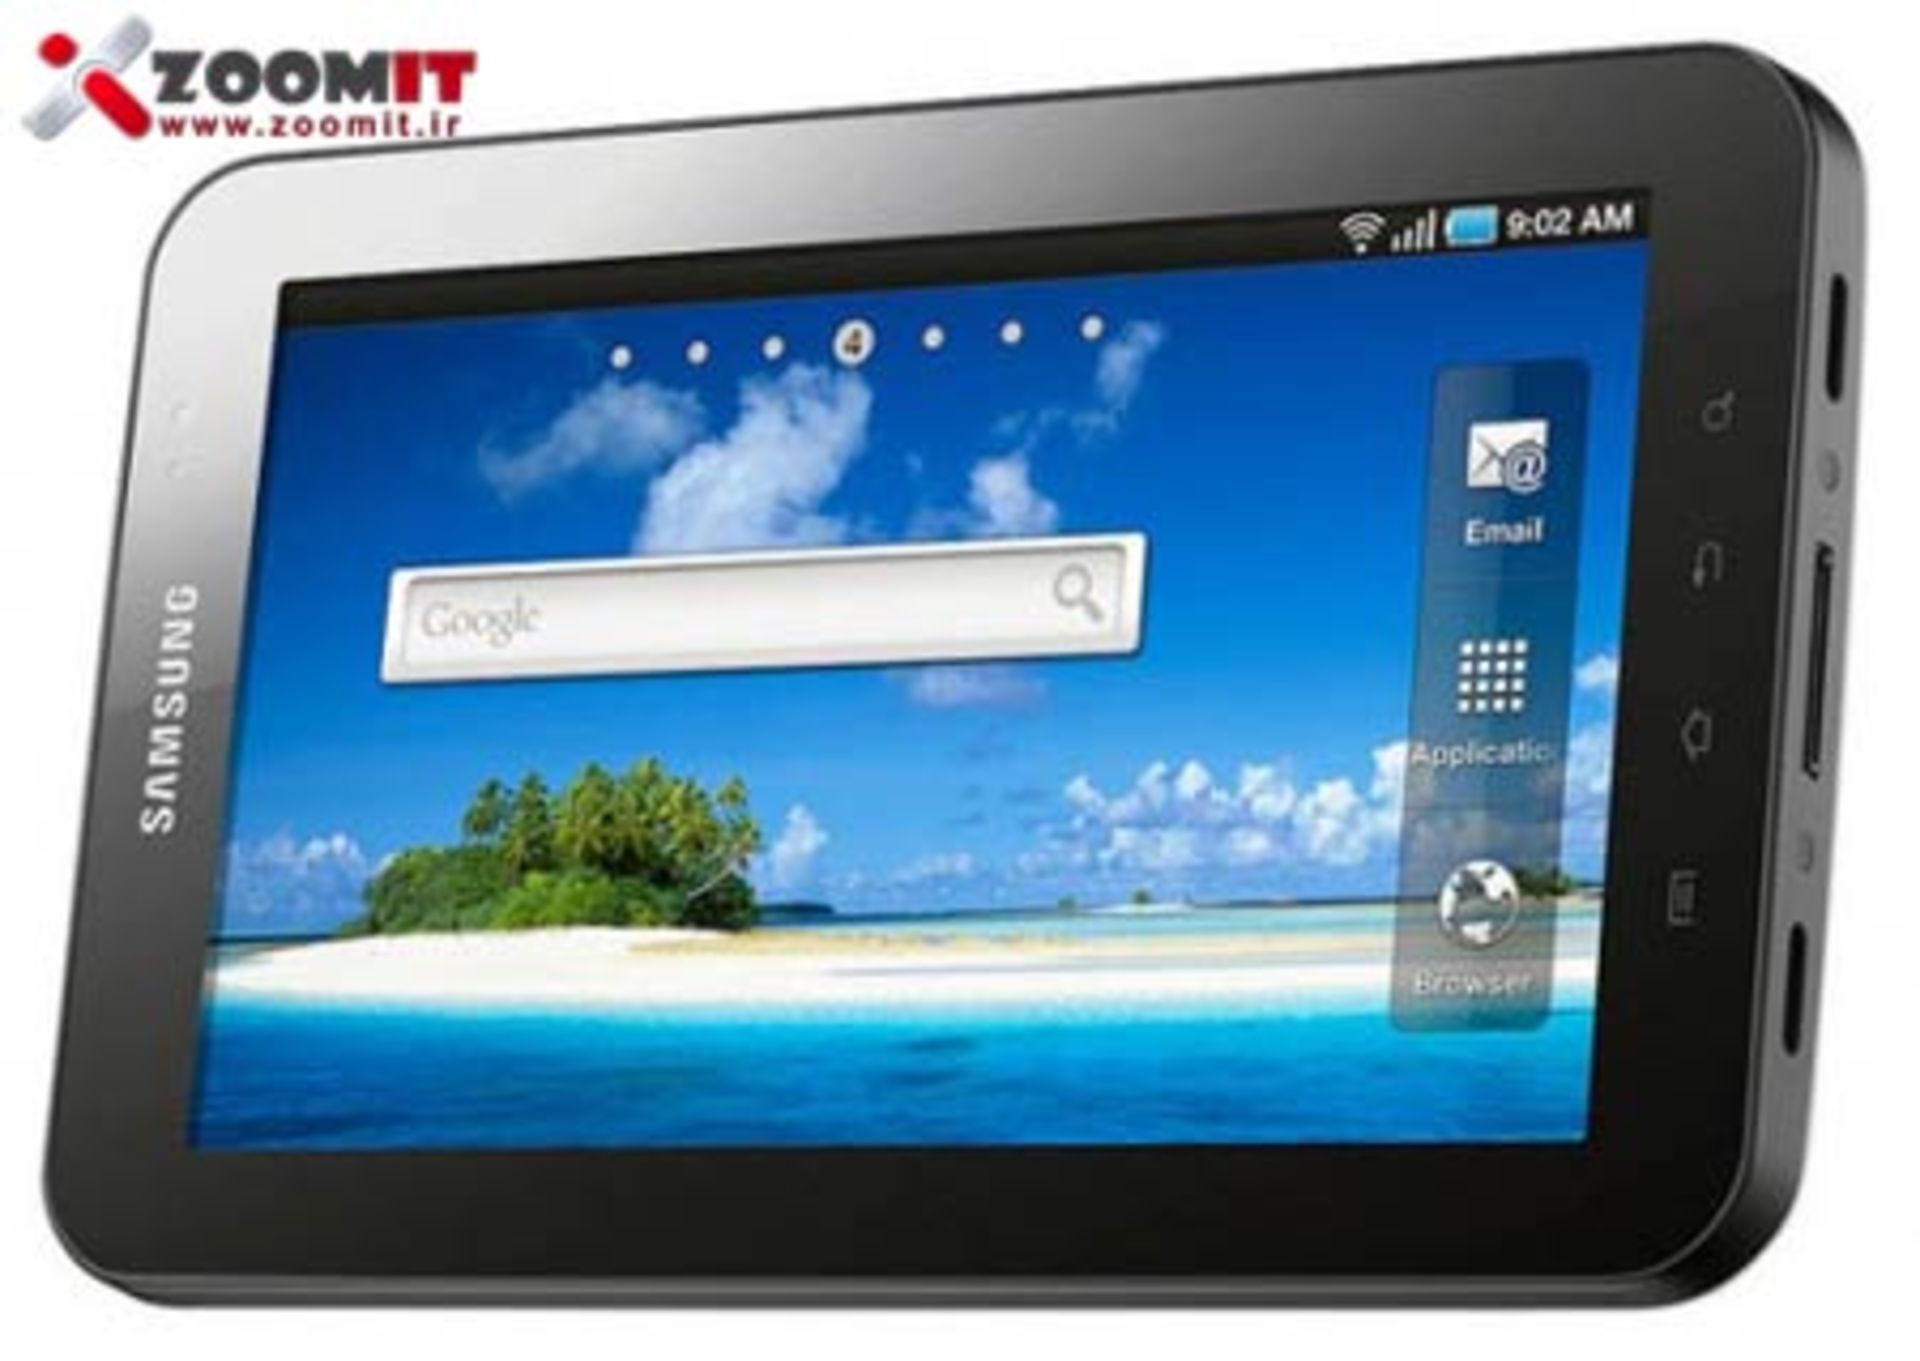 Samsung-Galaxy-Tab-7-inch-Android-2.2-OS-Based-Tablet-540x383